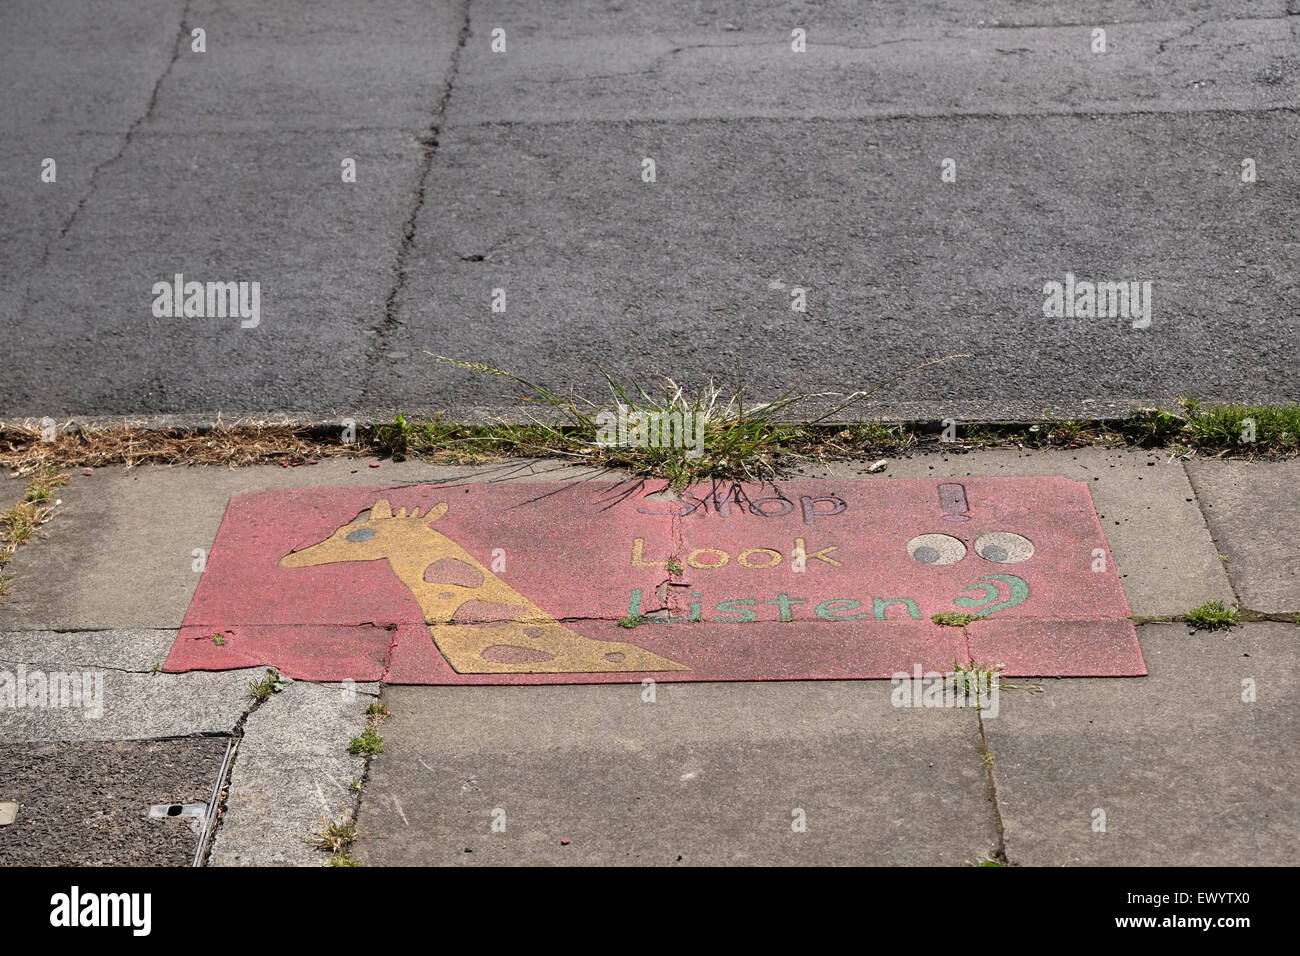 STOP LOOK LISTEN and don't trip up, a deteriorated child road safety sign. Stock Photo